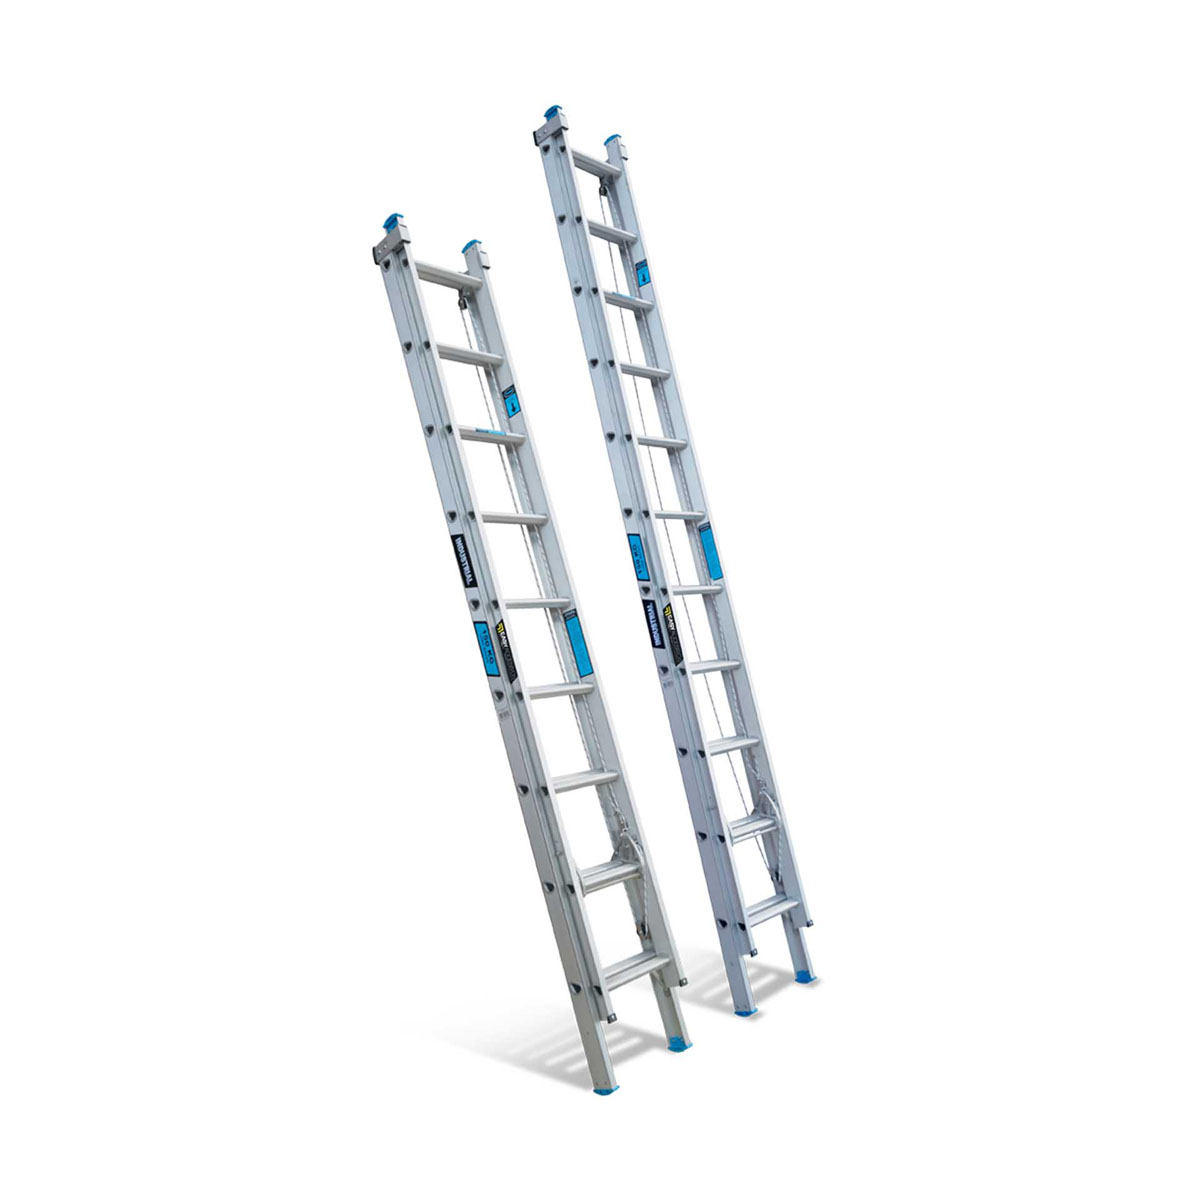 Buy Extension Ladders - Aluminium in Extension Ladders from Easy Access available at Astrolift NZ